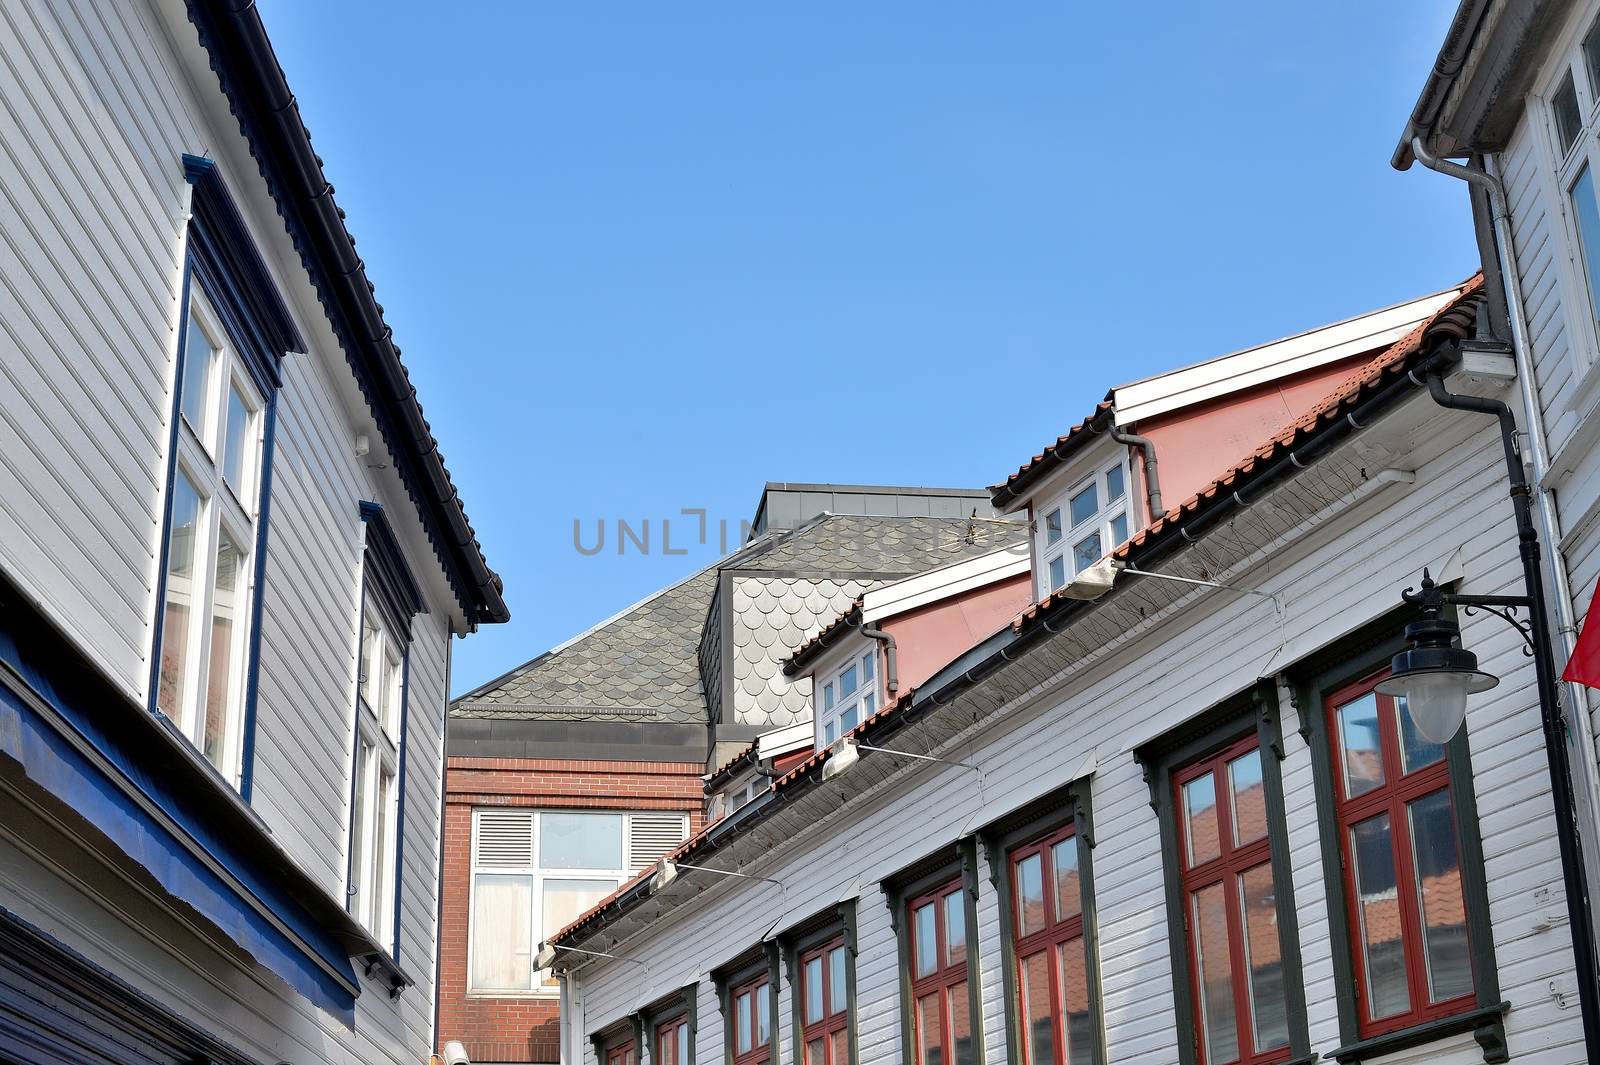 Traditional Building Skyline Stavanger City Centre Norway by Whiteboxmedia